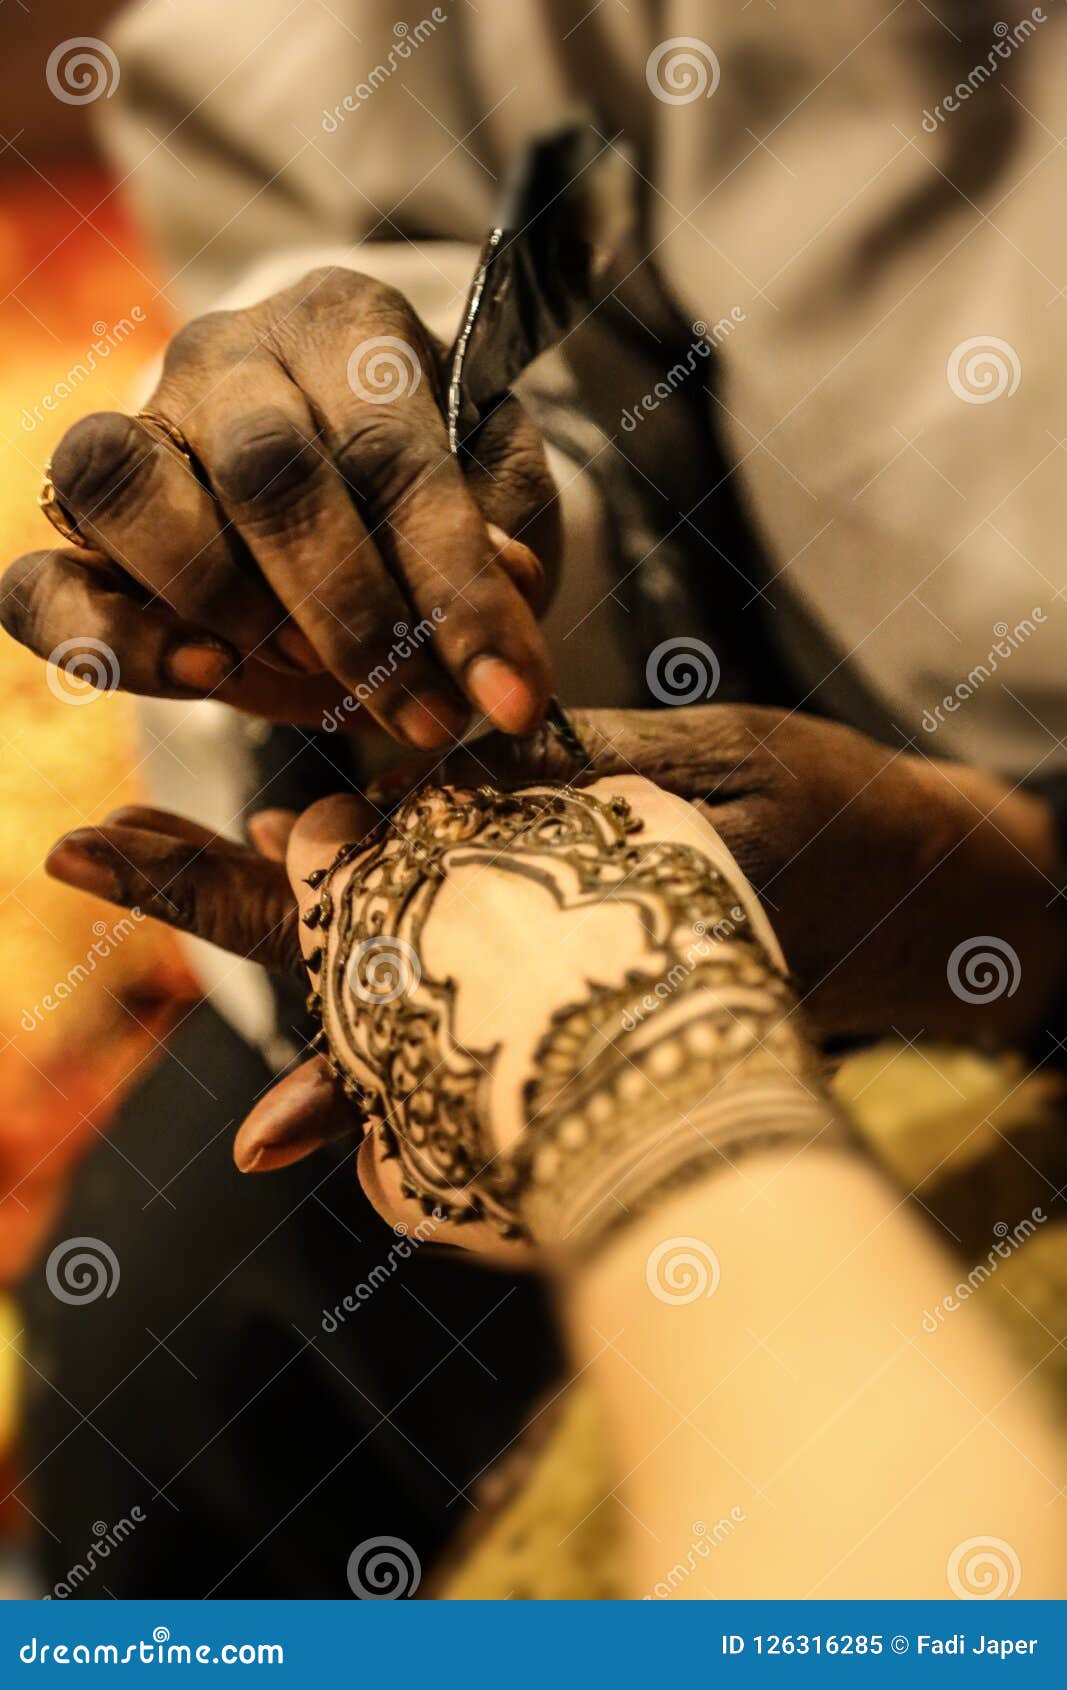 The Glamourous of Arabic Henna Art Stock Image - Image of drawing, henna:  126316285